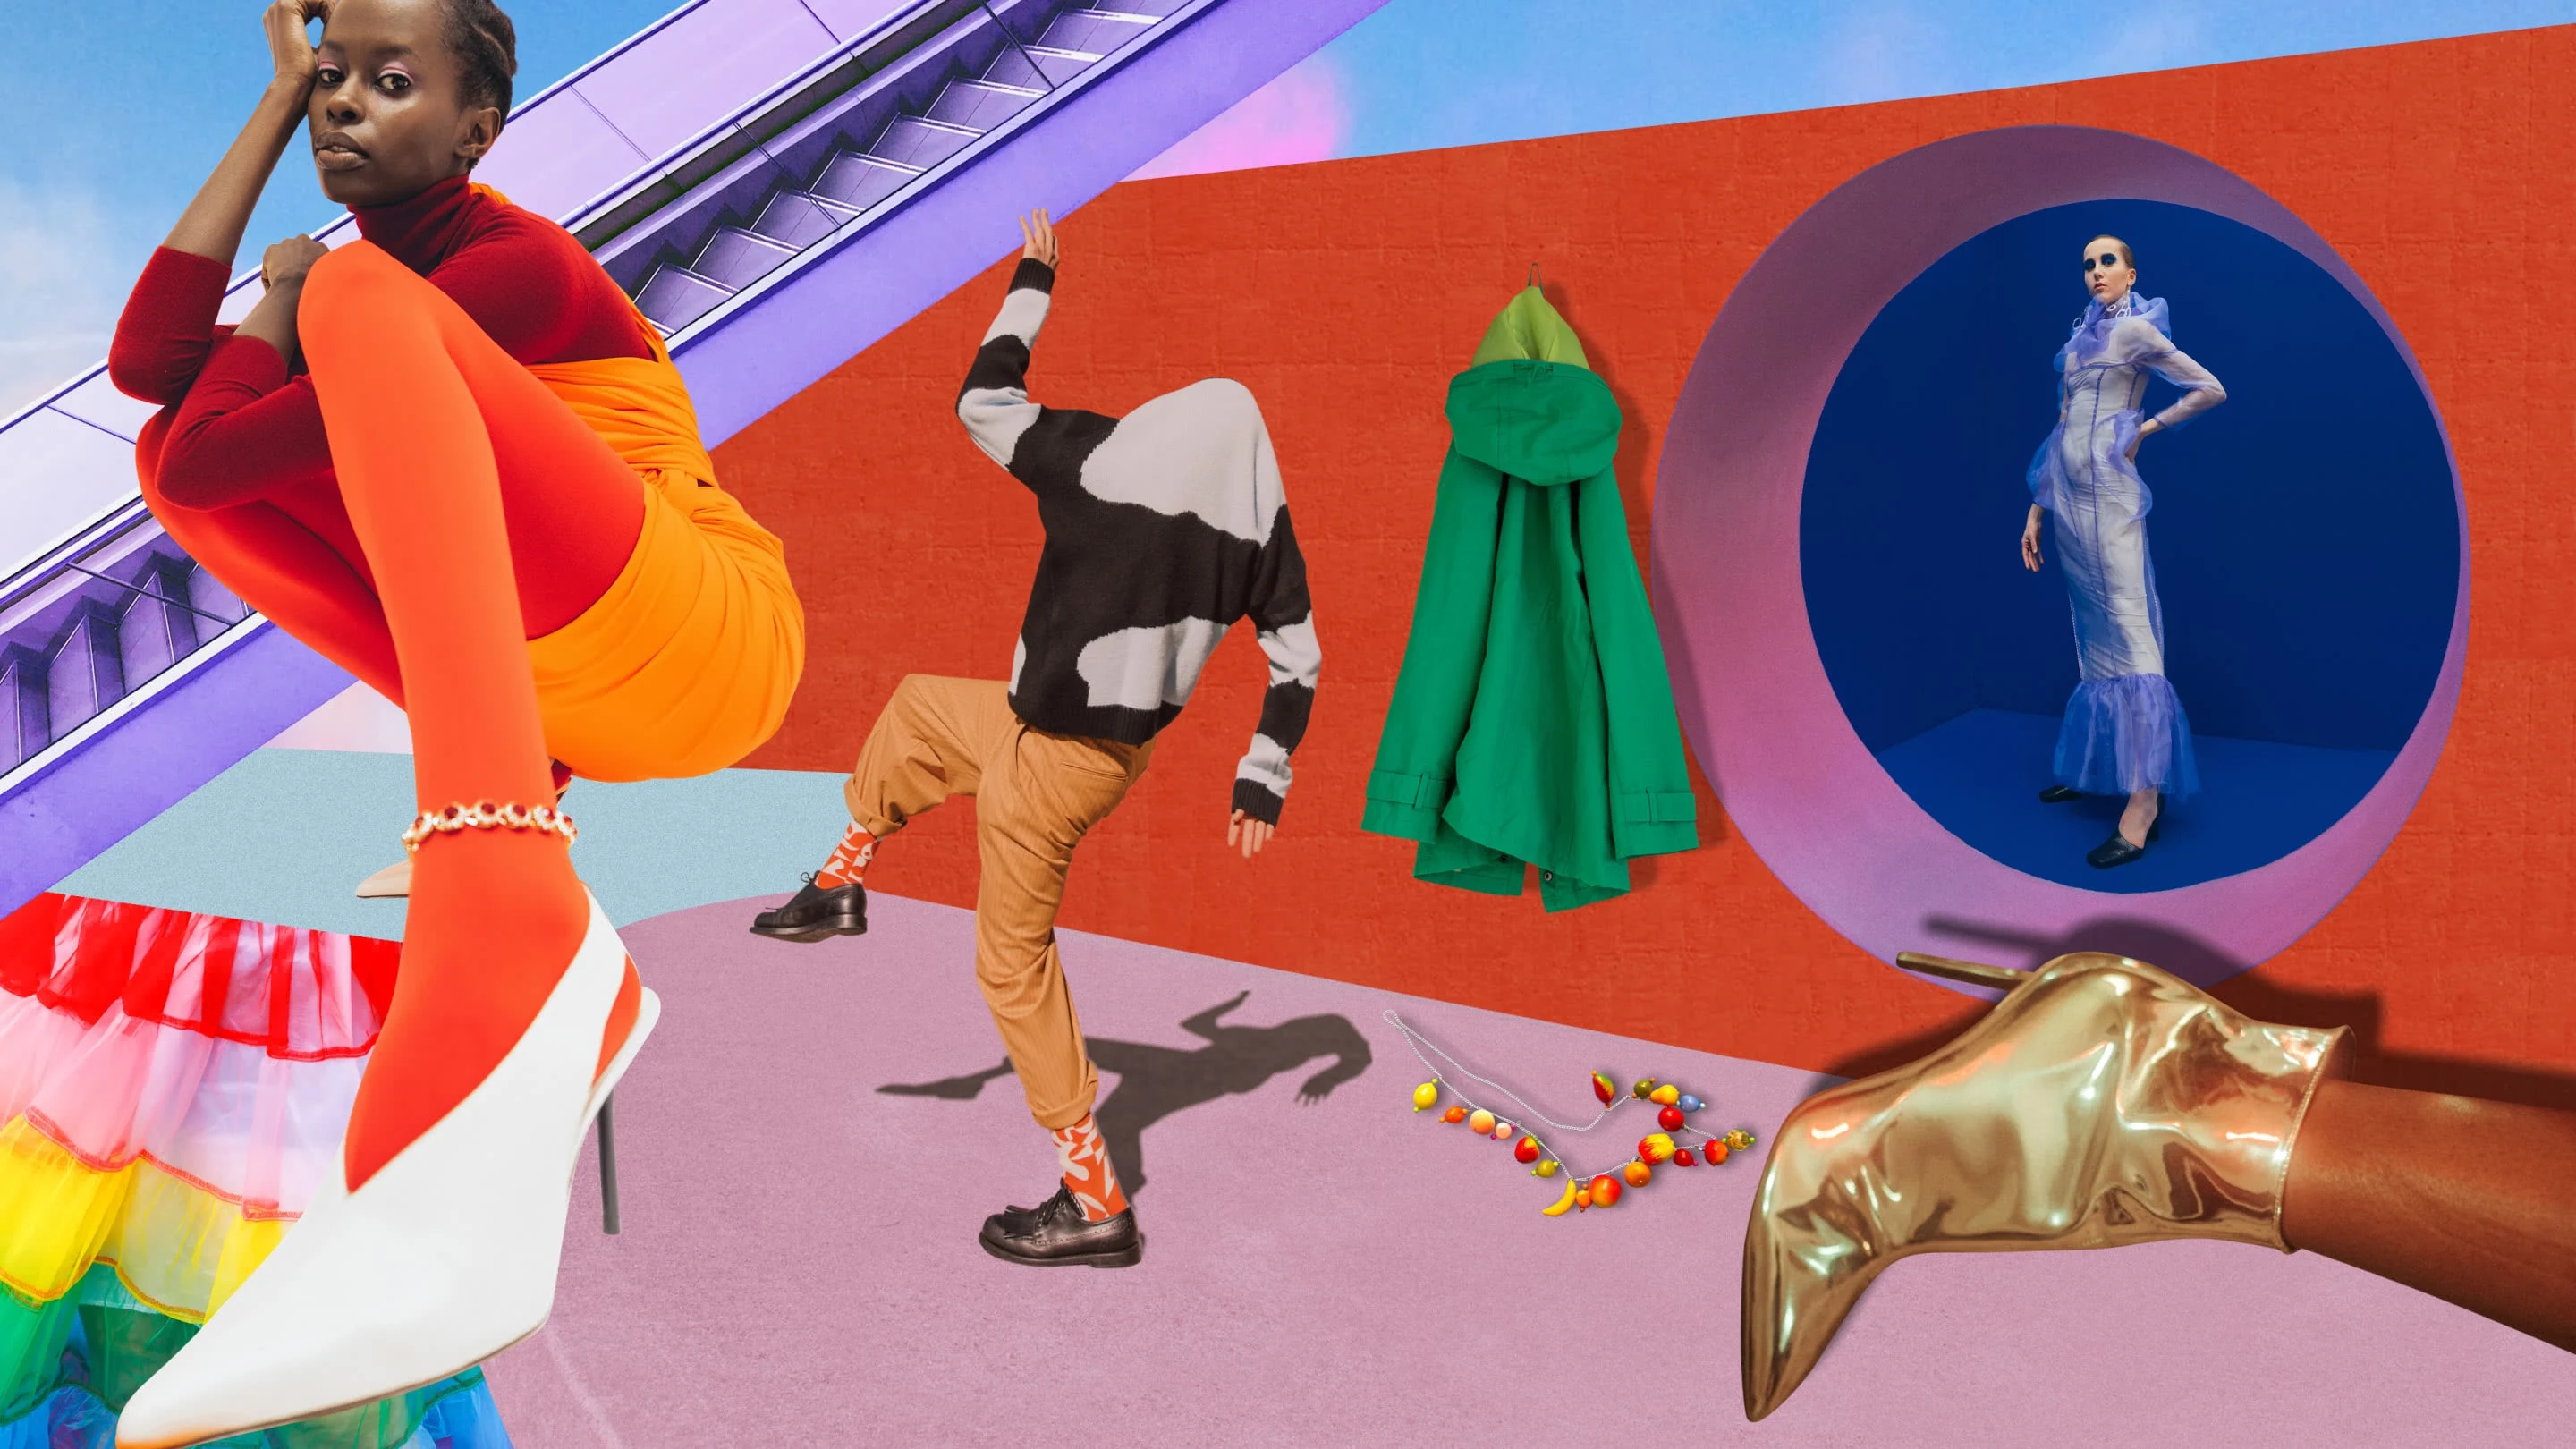 Collage of several people in colourful clothing. A Black woman on the left wears bright orange tights with a yellow dress. A man in the centre wears a black and white printed jumper pulled over his head, tan trousers and orange socks. A white woman on the right wears a blue chiffon dress.